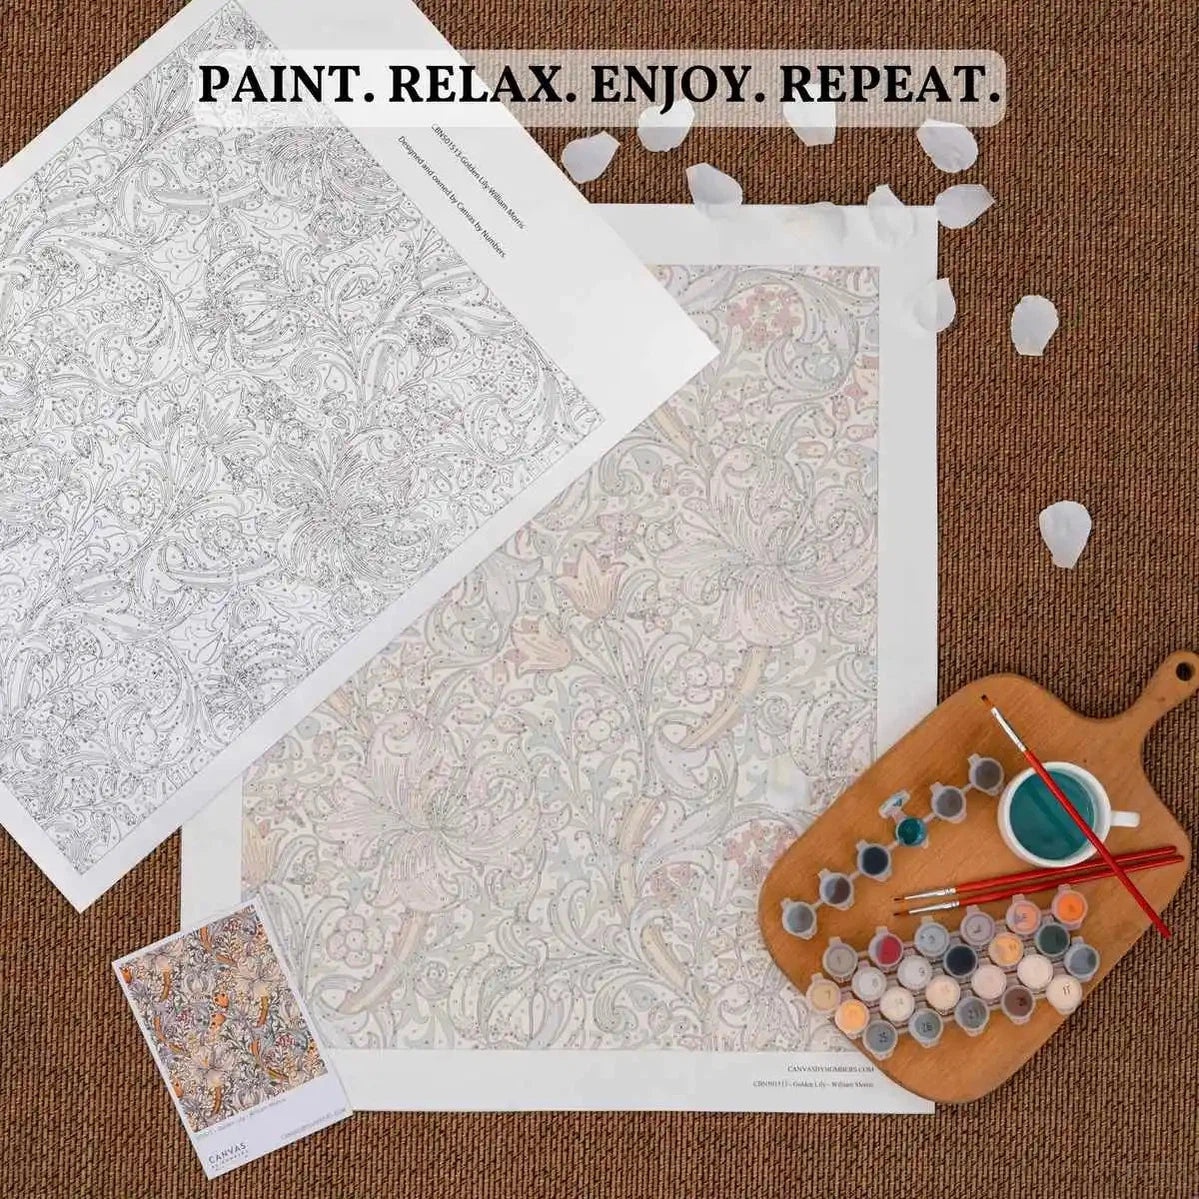 Pre-Painted Canvas for Adults: How to Get Started for Beginners